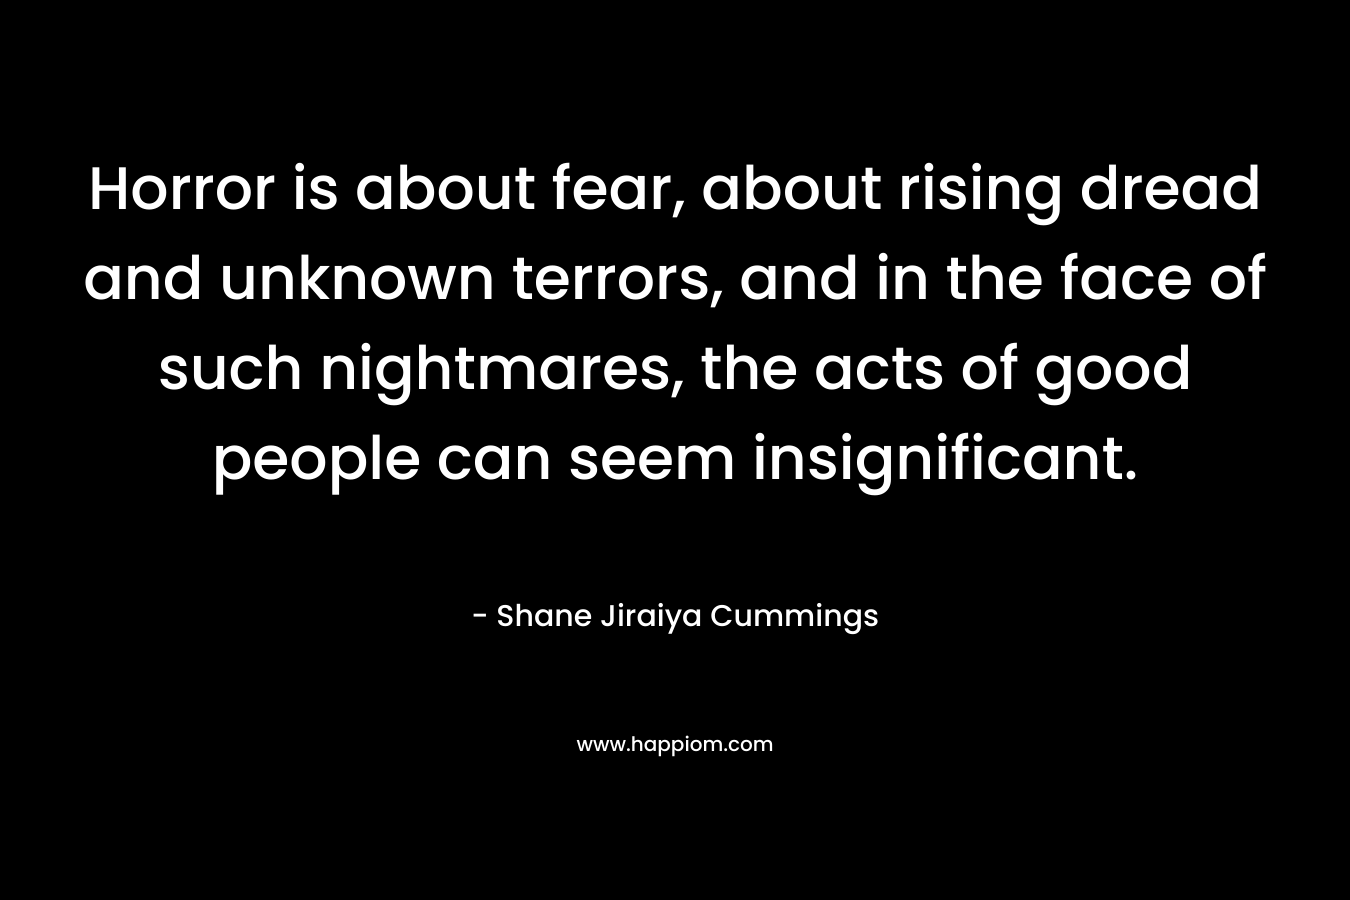 Horror is about fear, about rising dread and unknown terrors, and in the face of such nightmares, the acts of good people can seem insignificant. – Shane Jiraiya Cummings